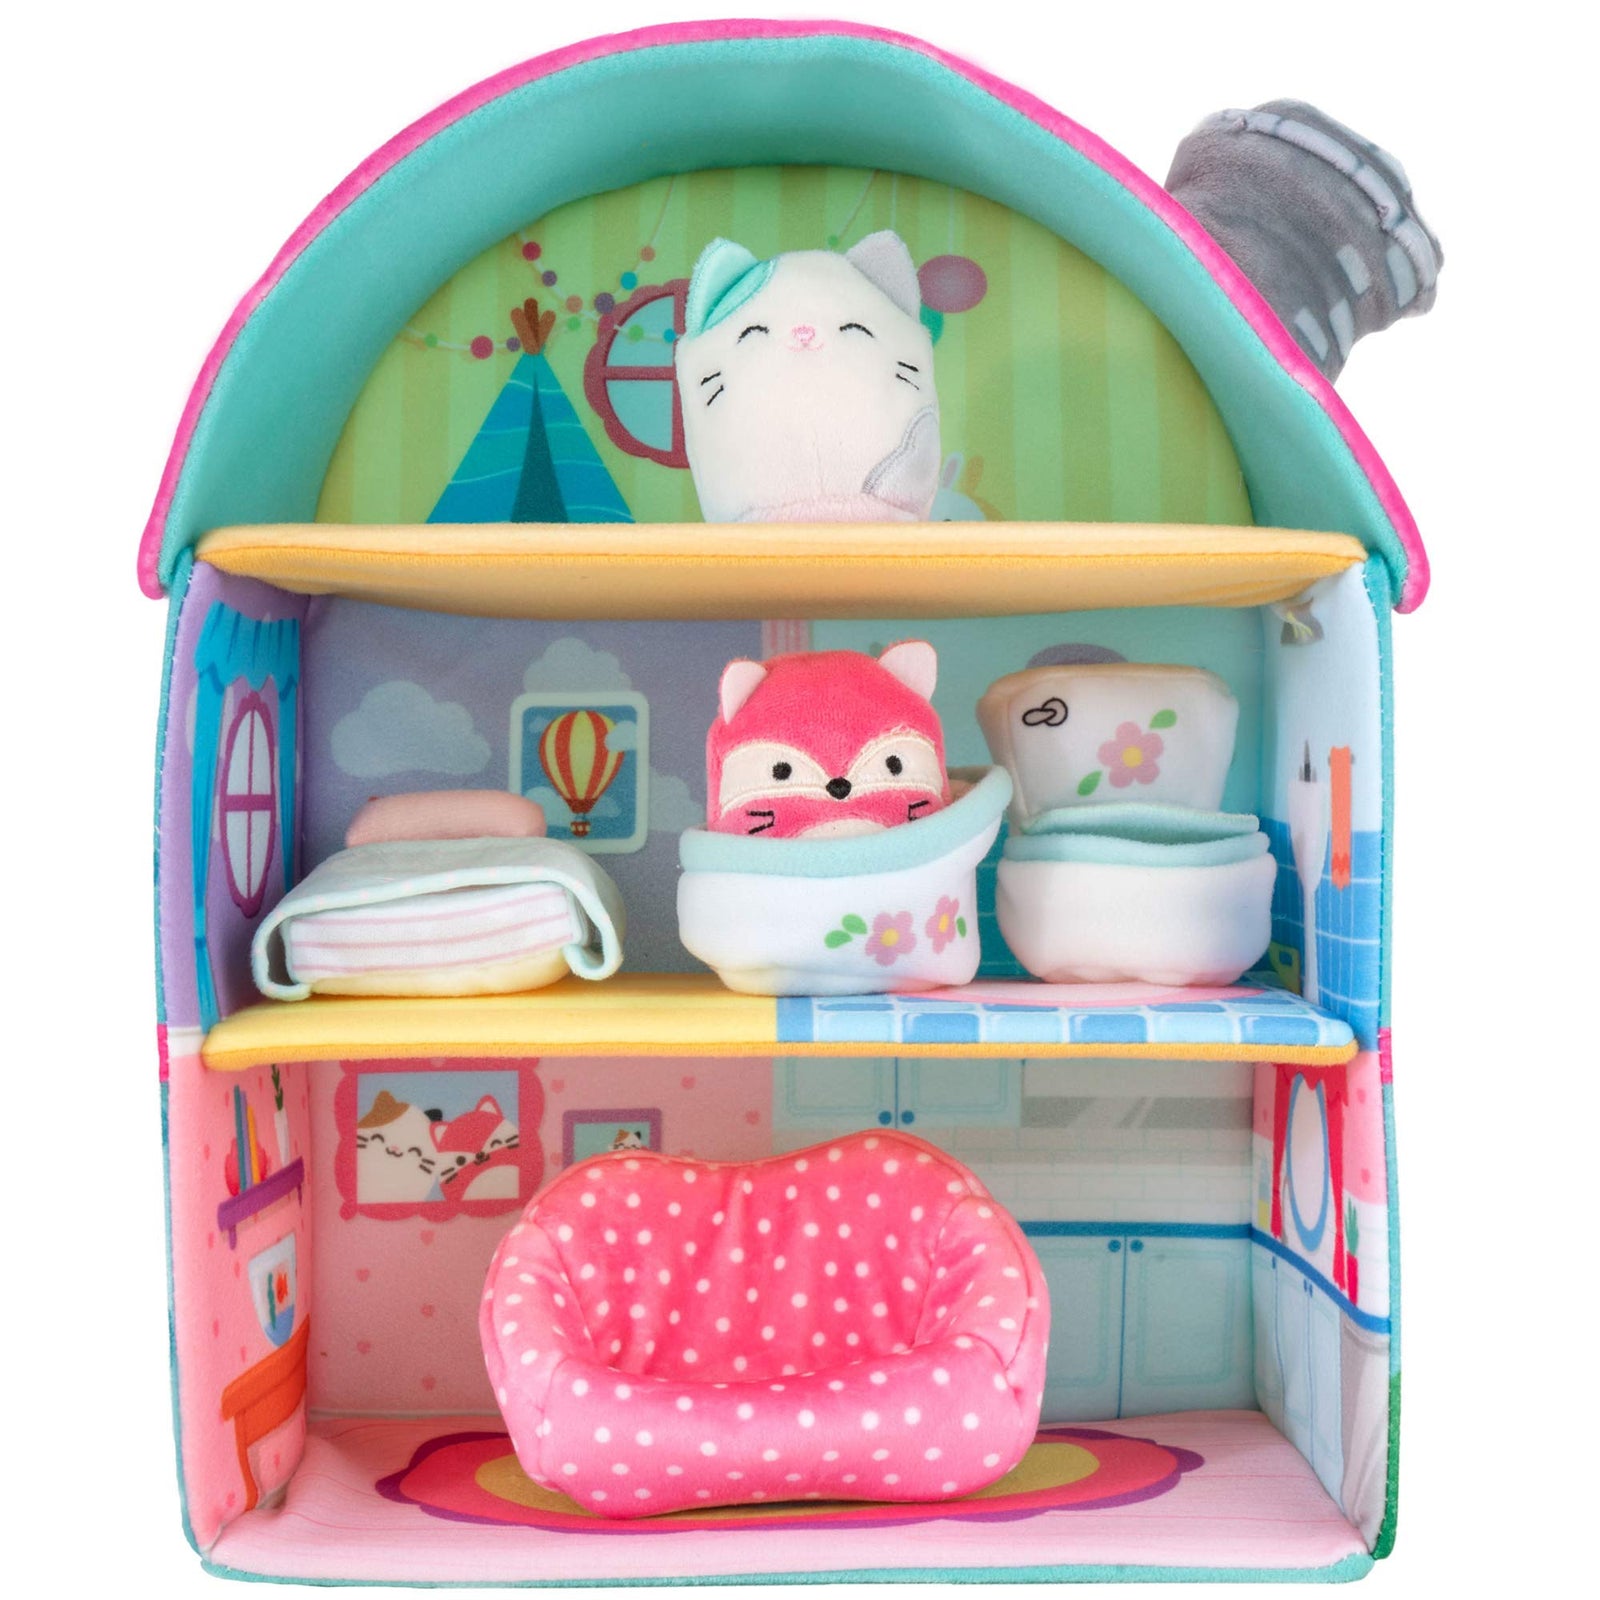 Squishville by Squishmallow Fifi’s Cottage Townhouse, 2” Blair and Fifi Soft Mini-Squishmallow and 4 Plush Furniture Accessories, Irresistibly Soft Plush Toys, 3 Floors to Explore, Amazon Exclusive